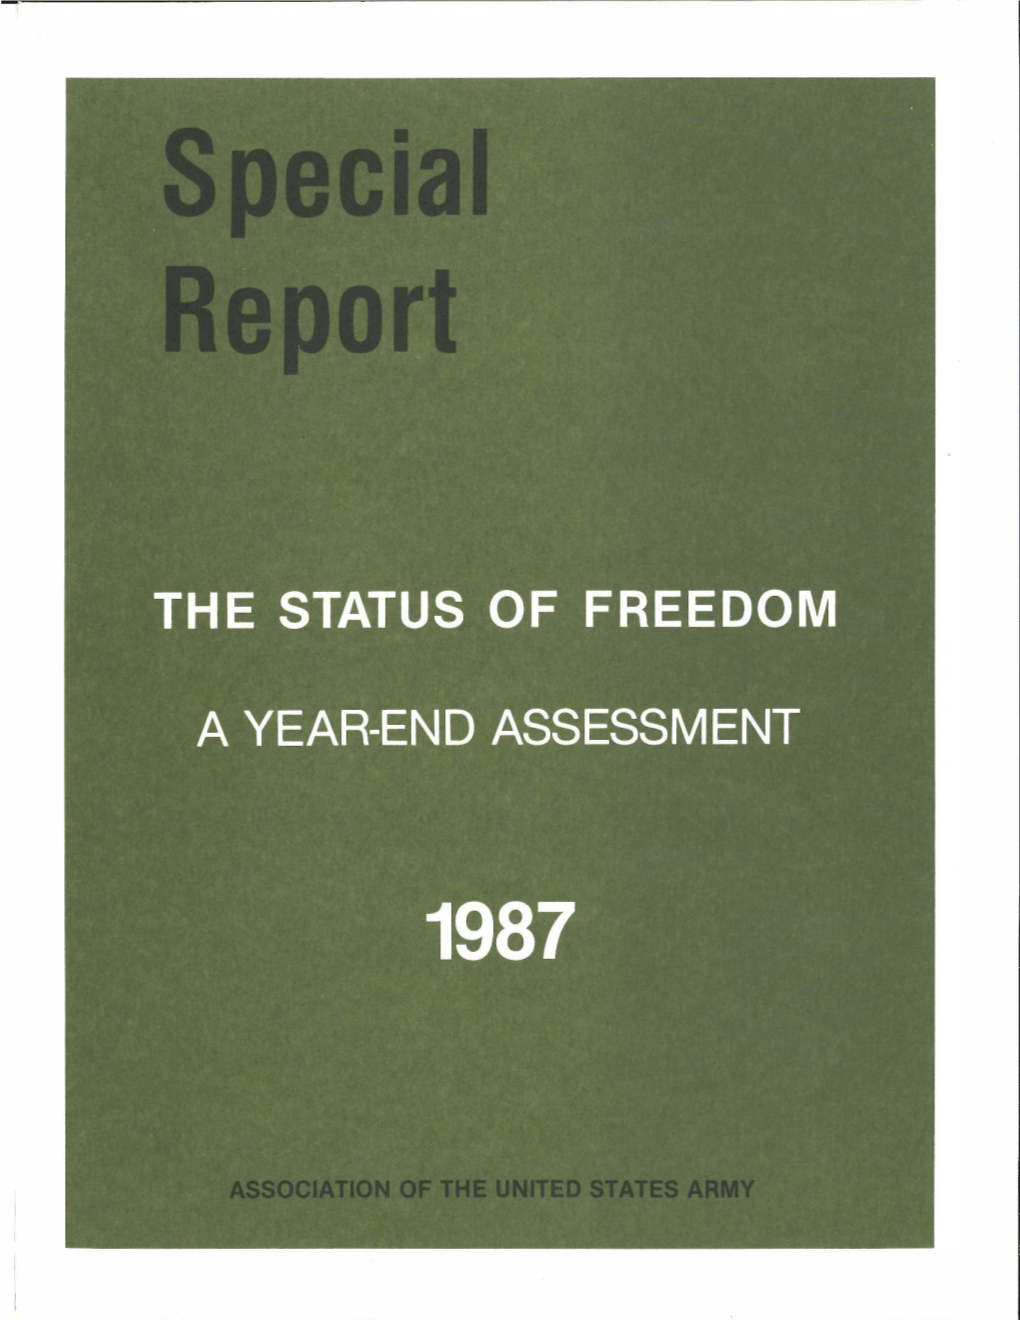 The Status of Freedom: a Year-End Assessment (1987)